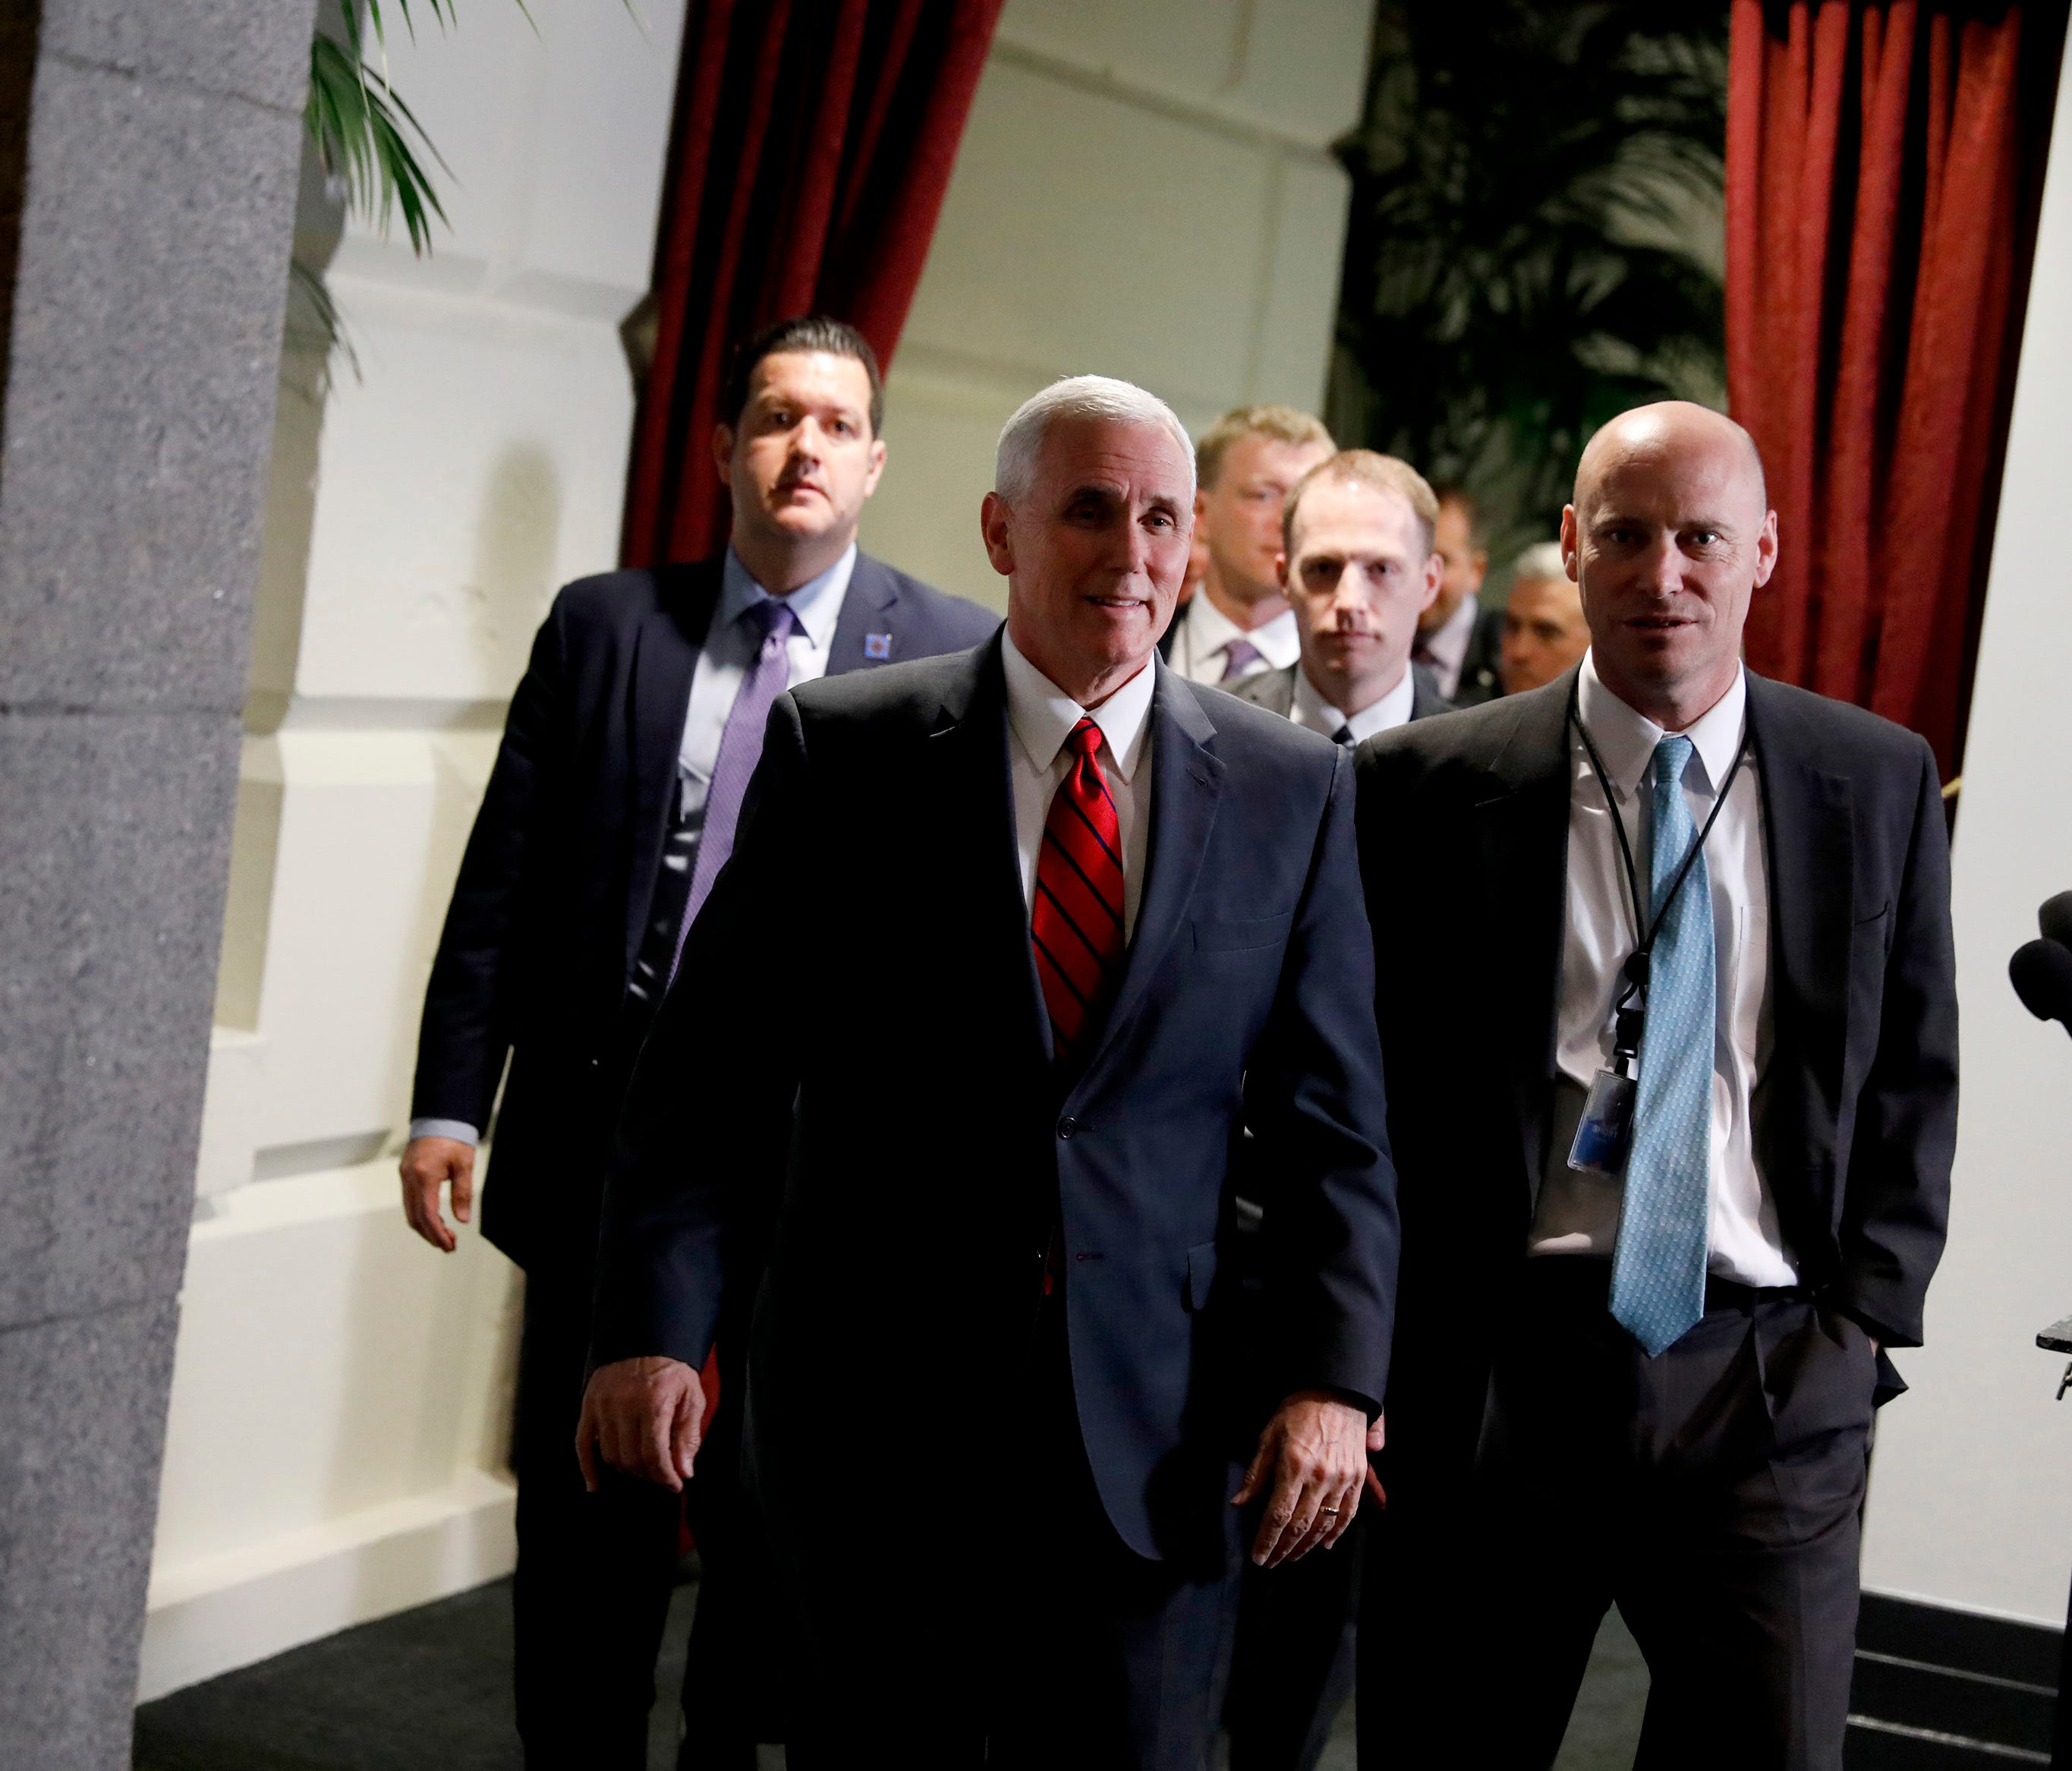 Pence departs after a meeting with House Republicans on health care legislation on Capitol Hill on April 4, 2017.